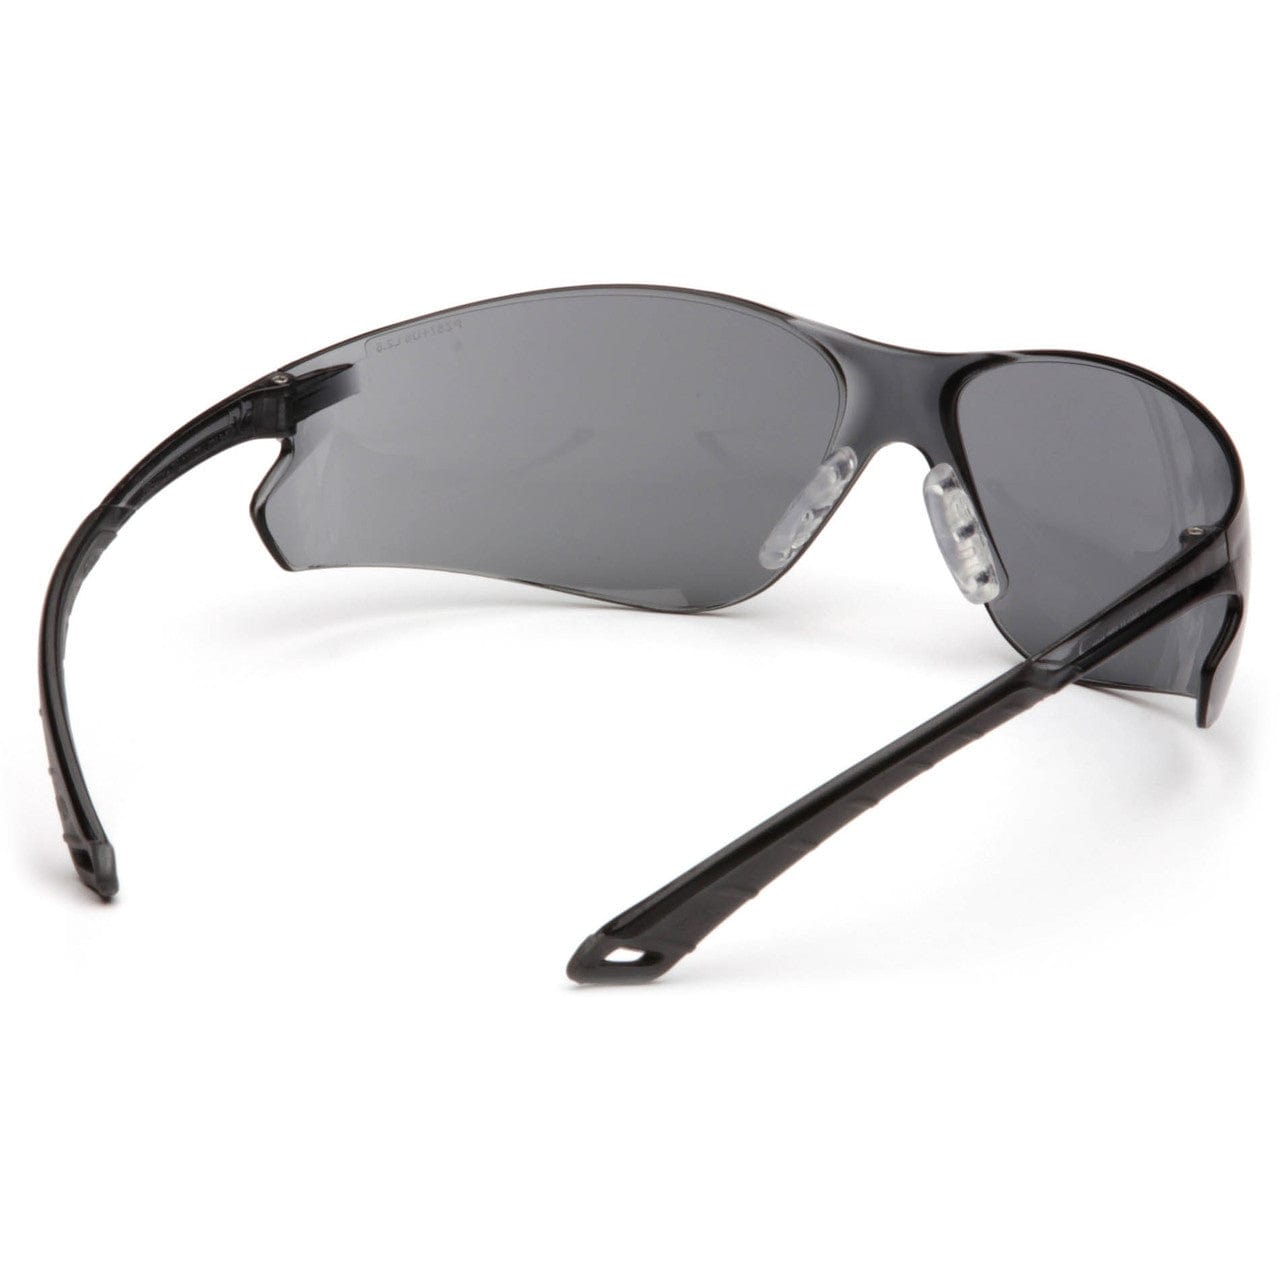 Pyramex Itek Safety Glasses with Gray Lens S5820S Inside View